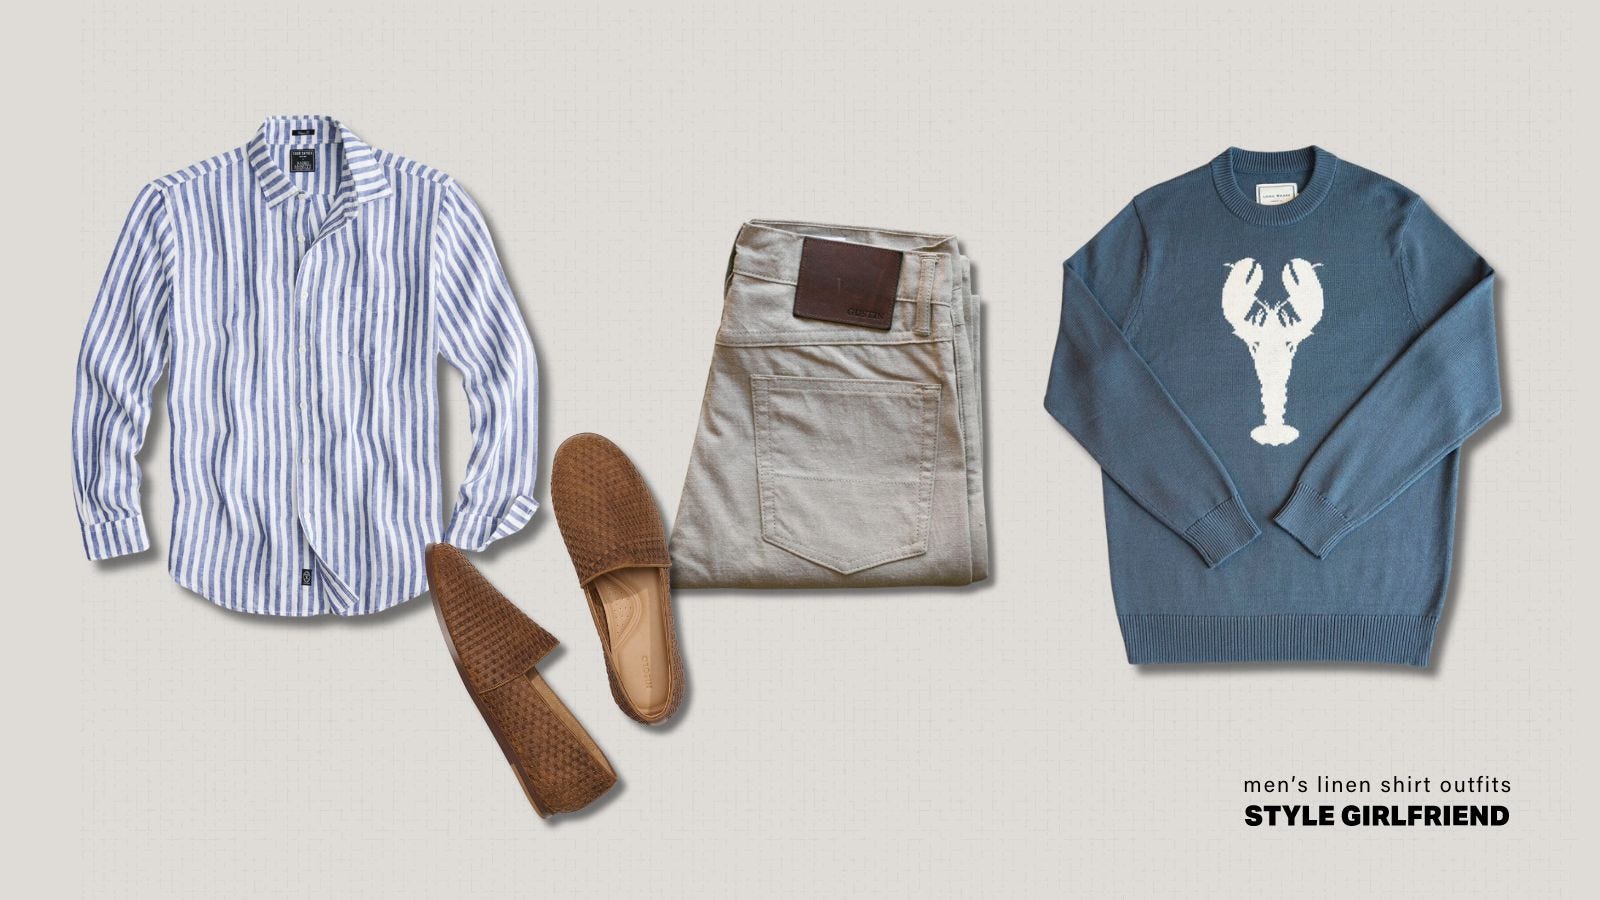 men's linen shirt outfit with chambray 5-pocket pants and a blue sweater